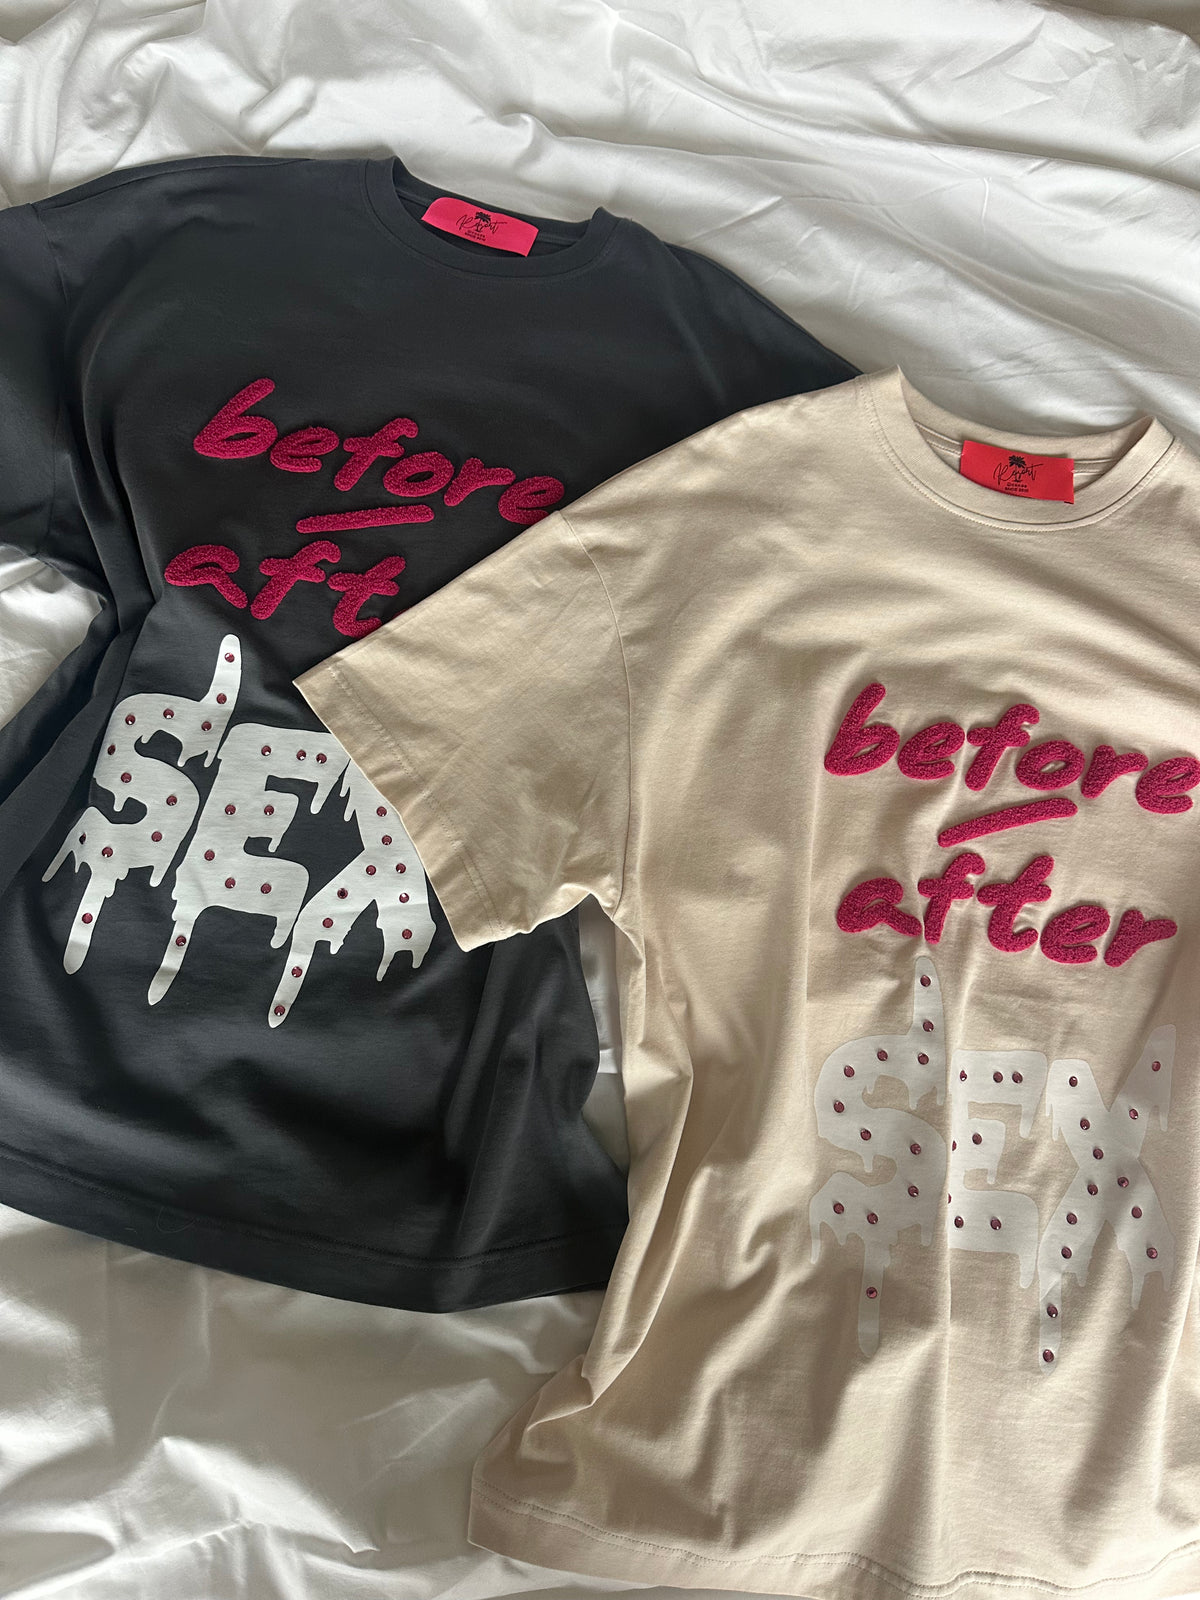 T-SHIRT before/after SAND